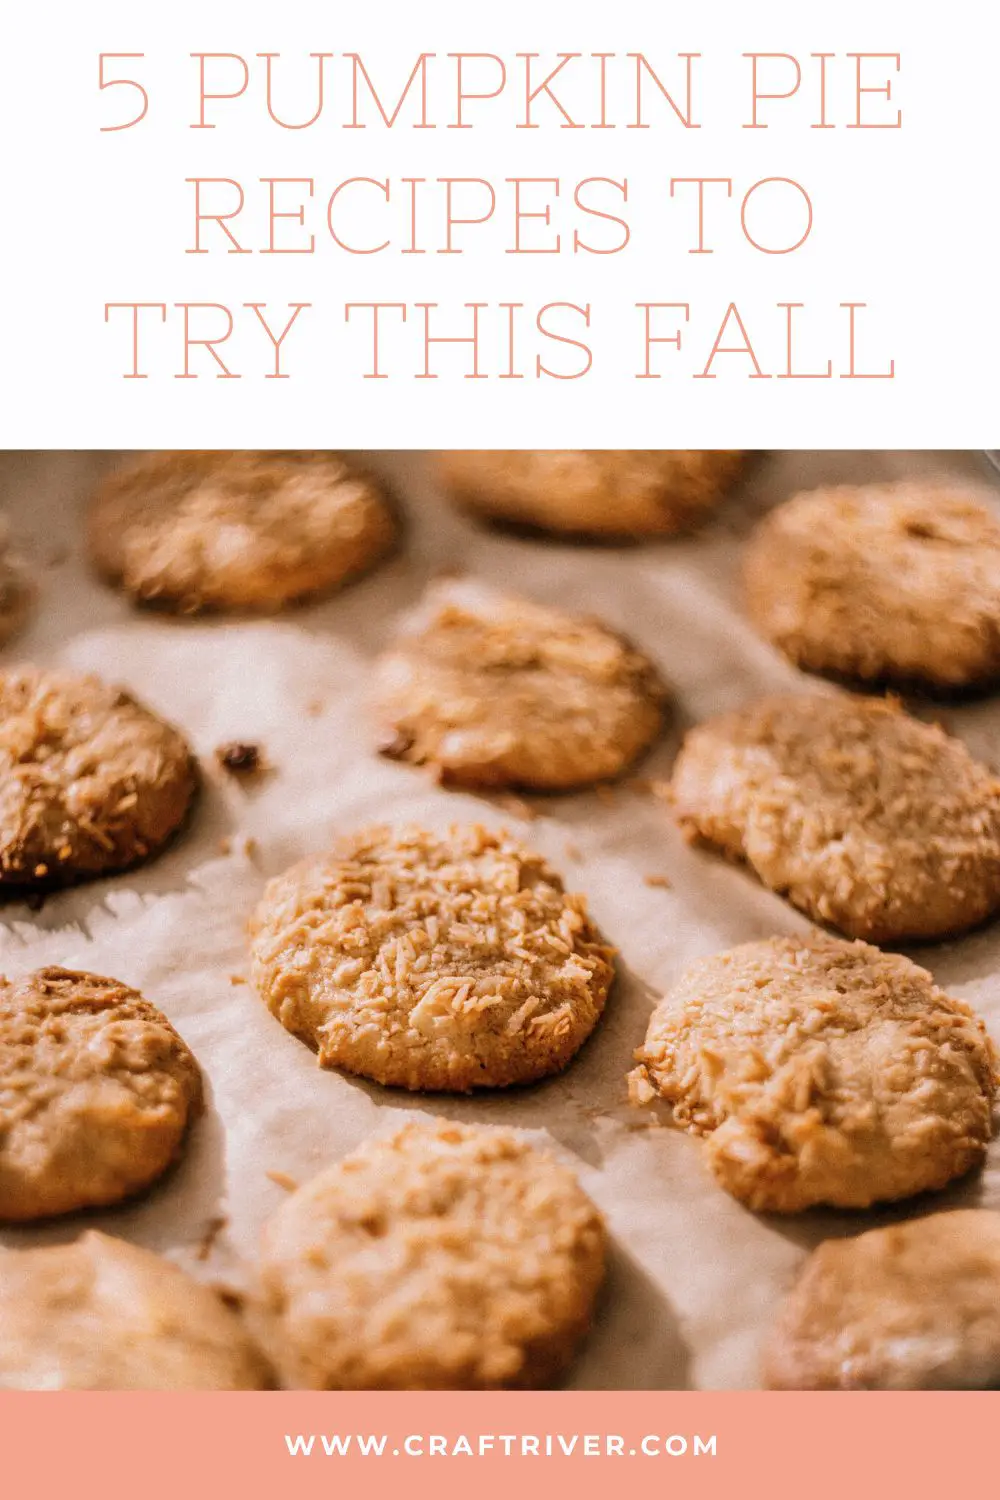 Pumpkin Cookie Recipes to Try This Fall